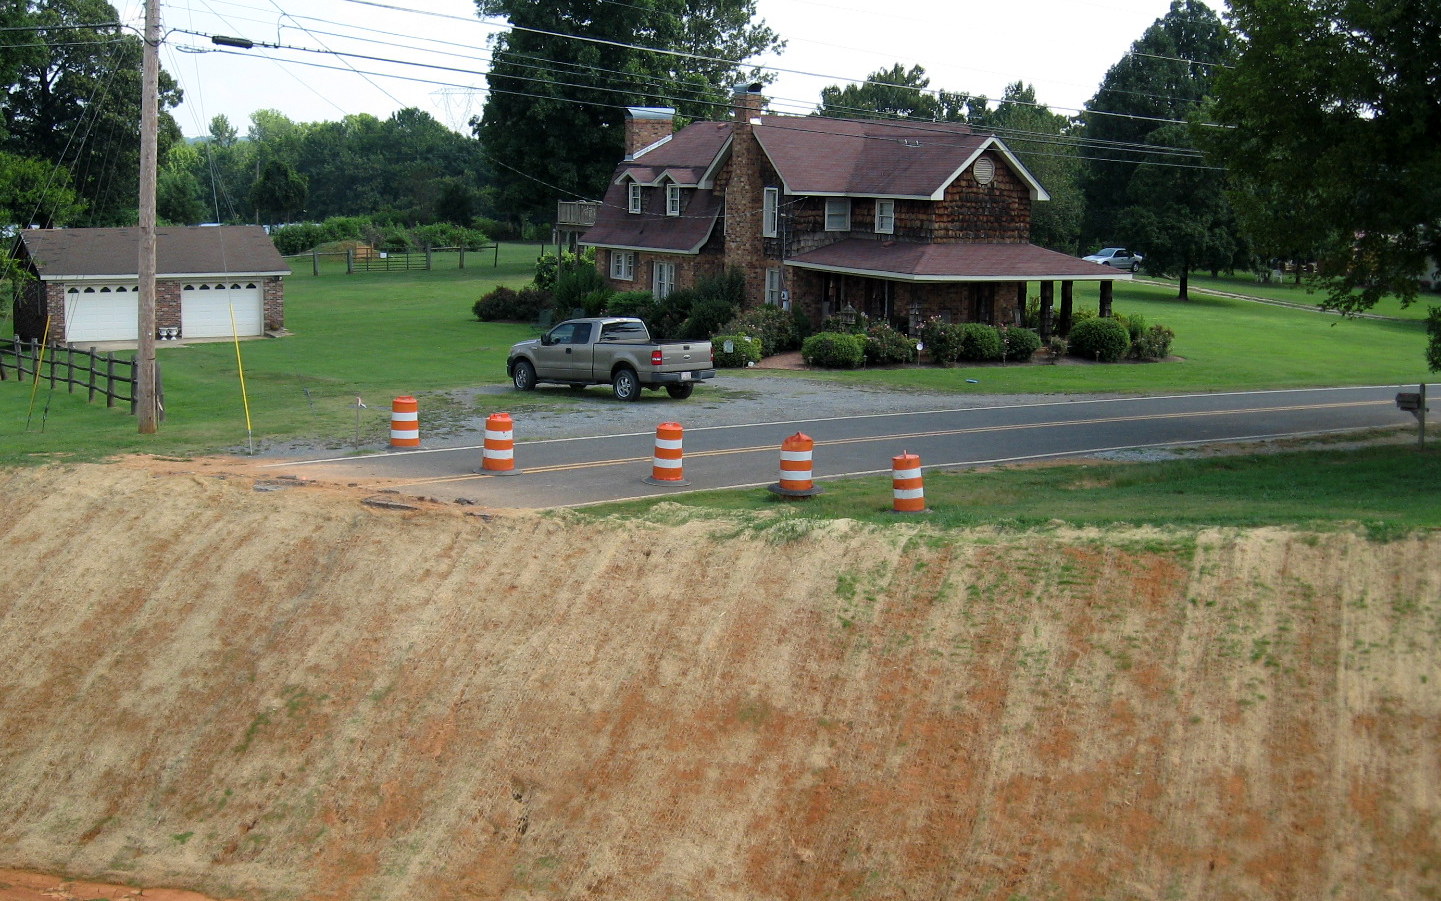 Photo showing houses close to the freeway right-of-way along the former Banner 
Whitehead Rd alignment in Aug. 2012